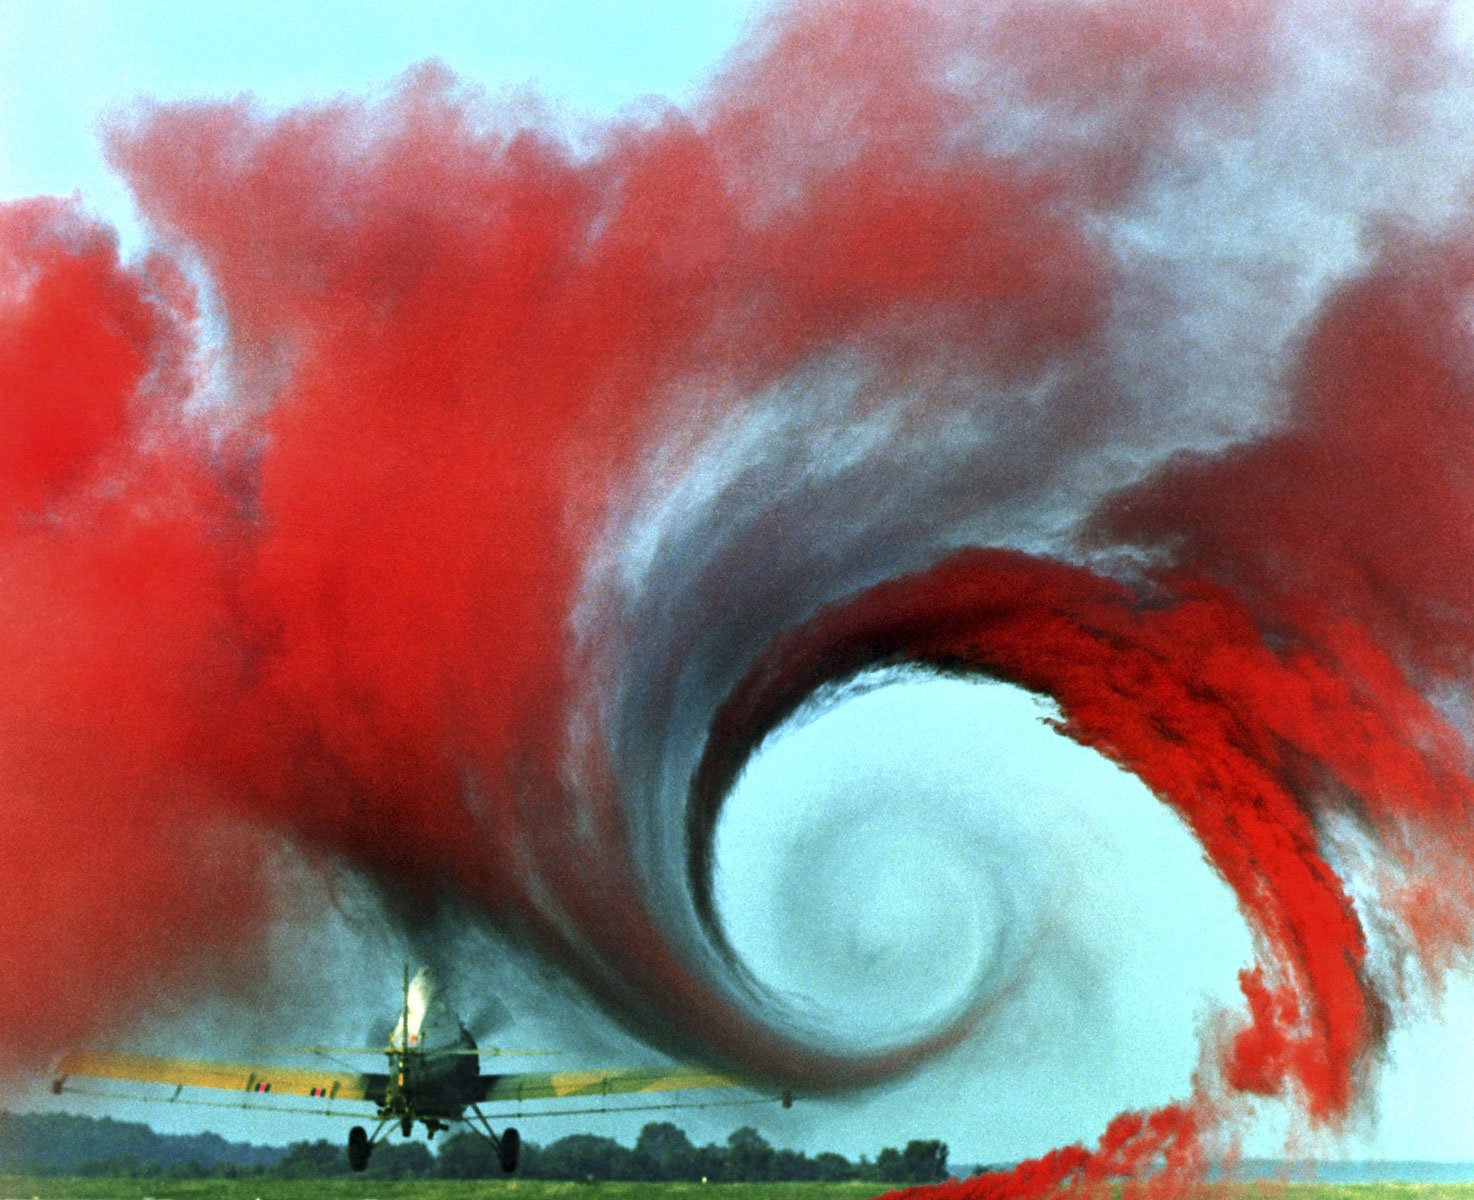 Red smoke on the ground shows the vortex made by the air flowing from the wing of the airplane.